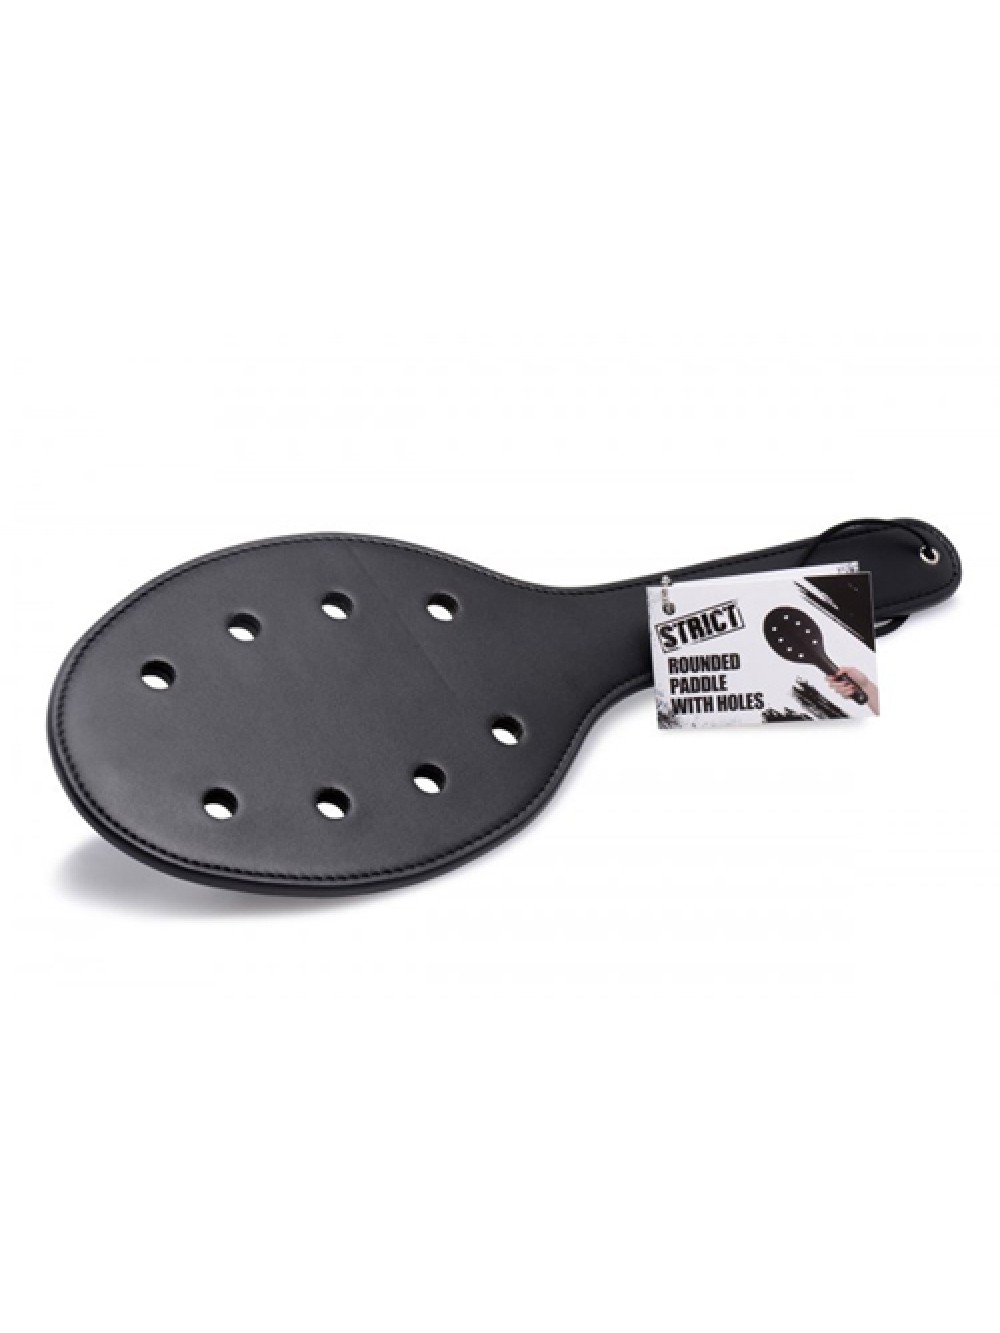 Deluxe Rounded Paddle with Holes 848518025135